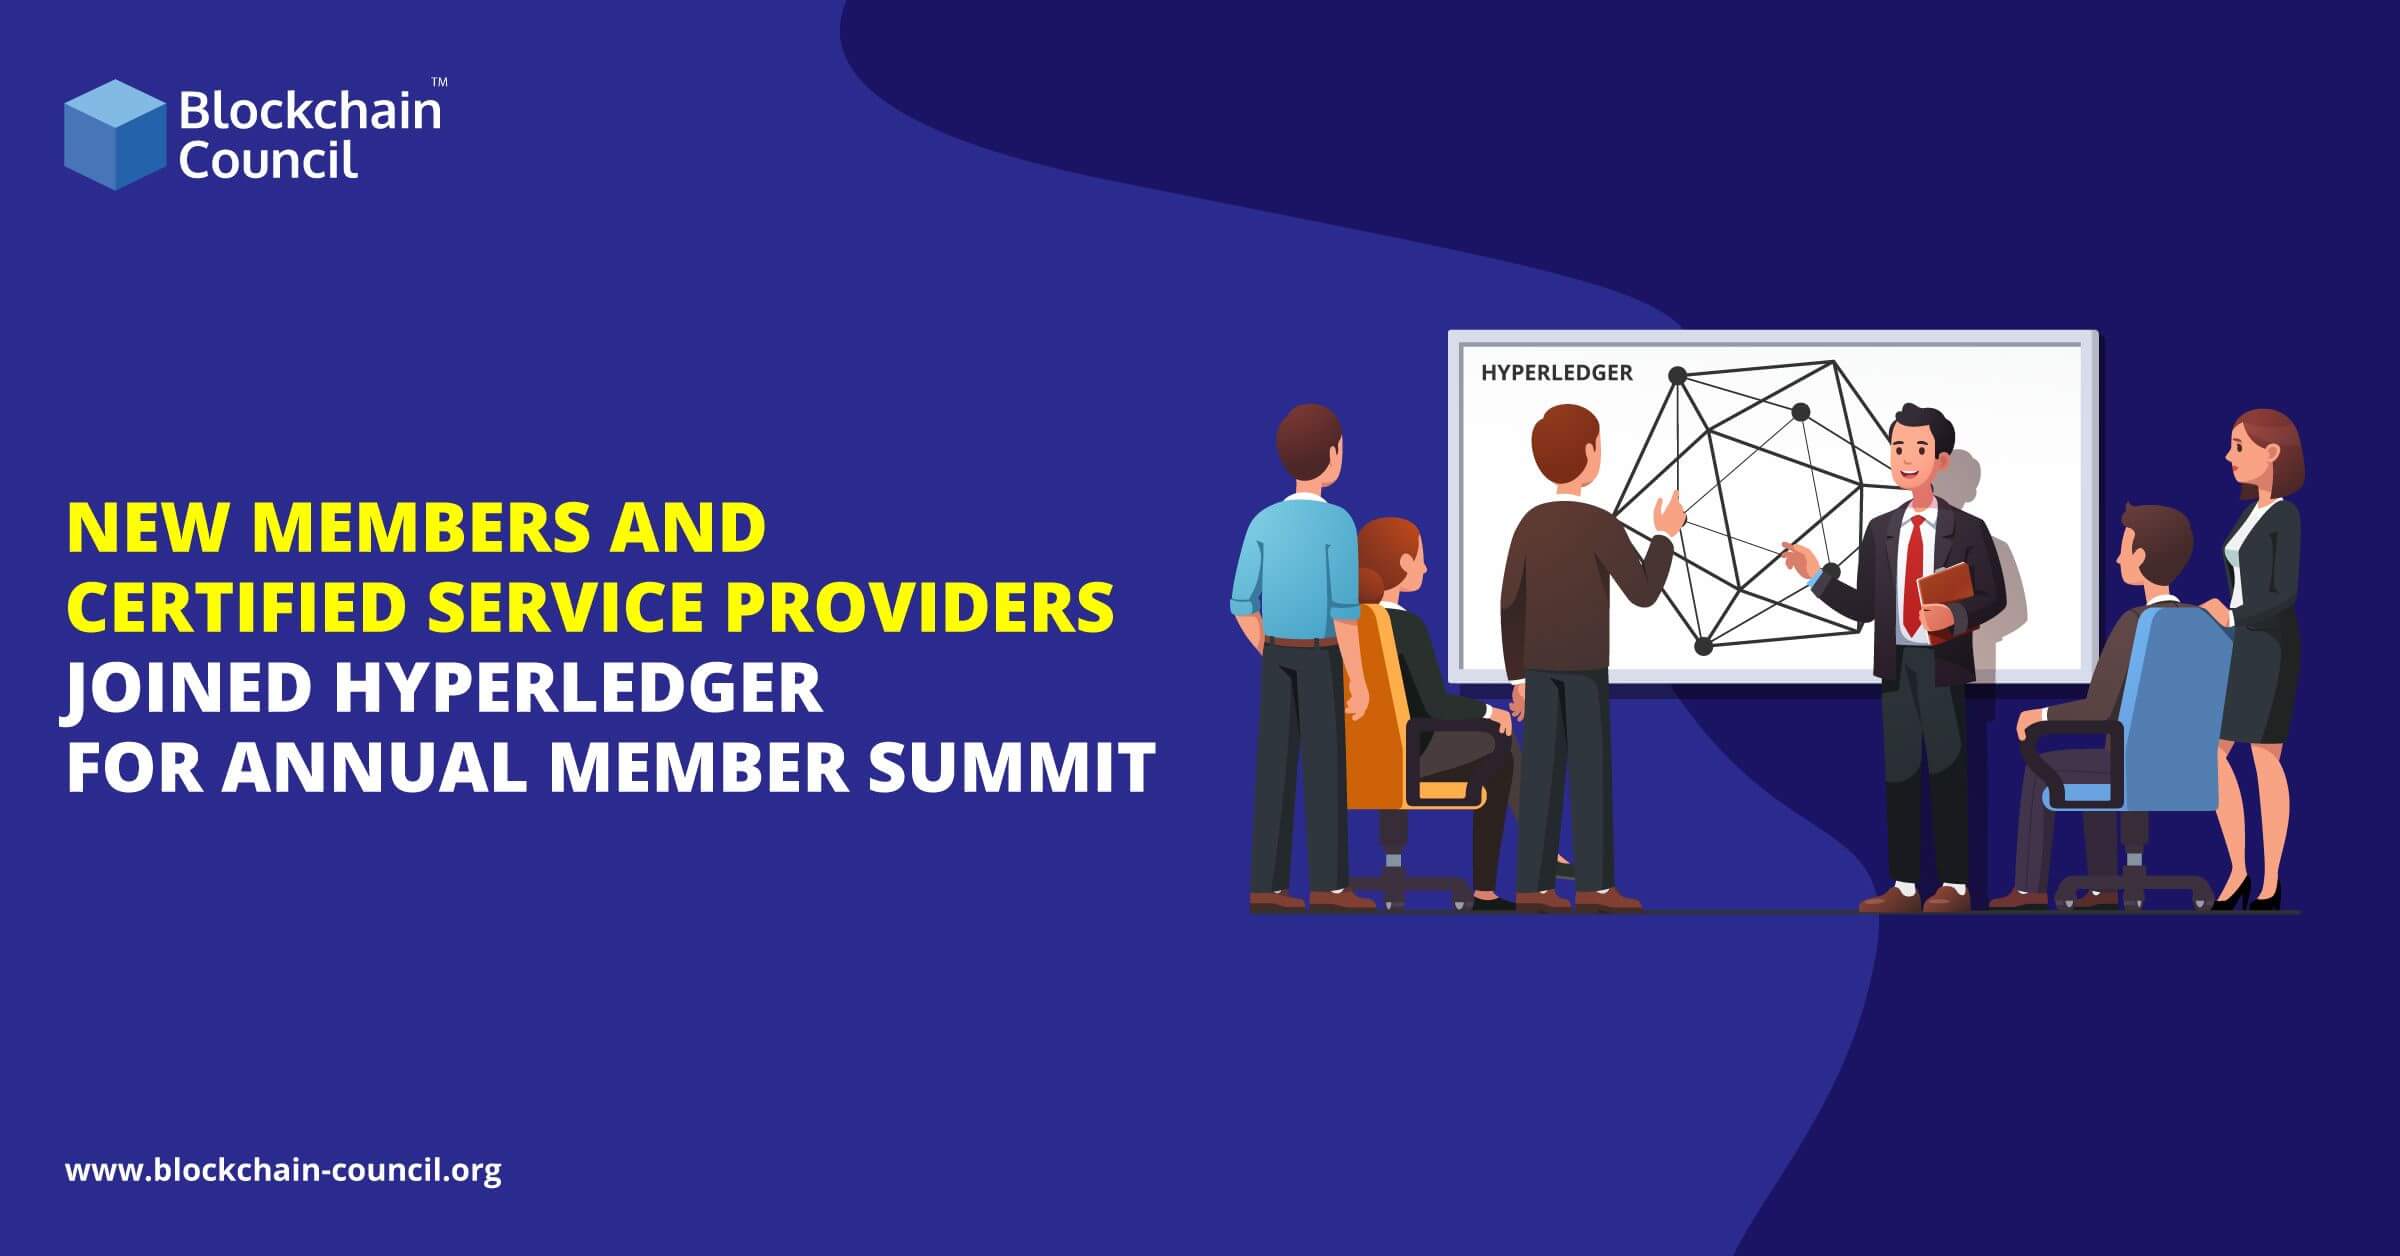 New-Members-and-Certified-Service-Providers-Joined-Hyperledger-for-Annual-Member-Summit